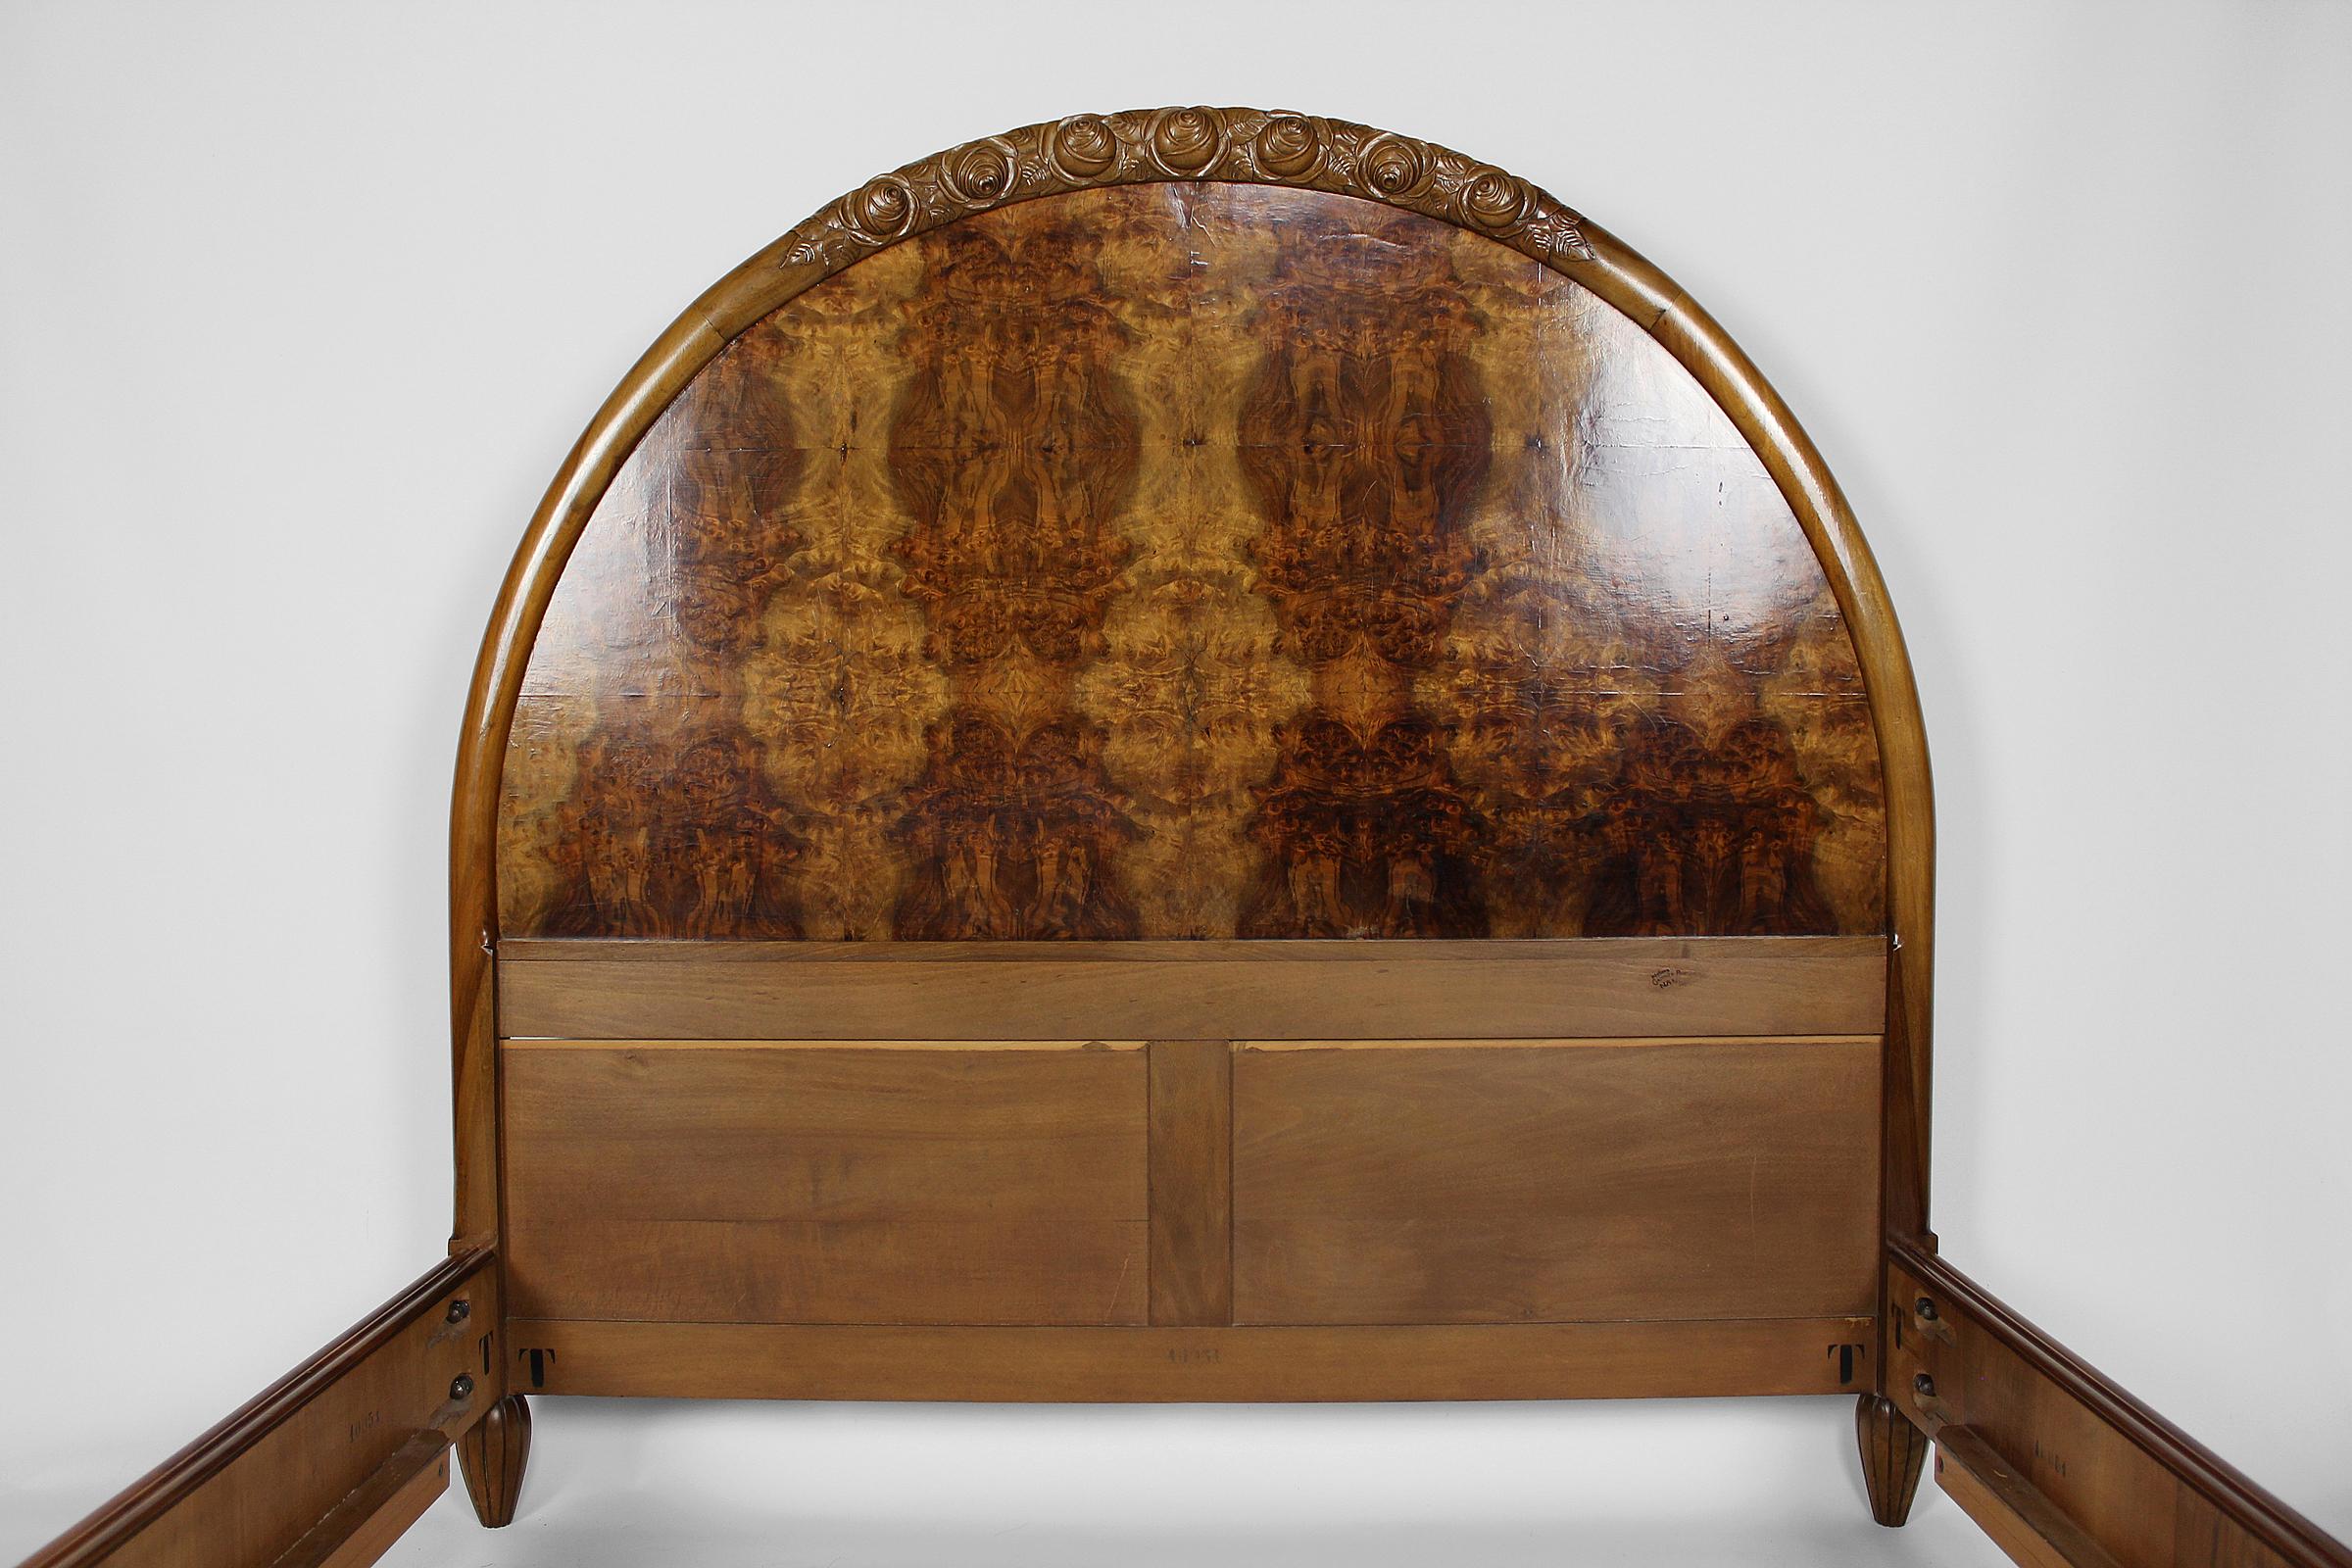 Early 20th Century Art Deco Double Bed by Ateliers Gauthier-Poinsignon in walnut, circa 1920-1930 For Sale